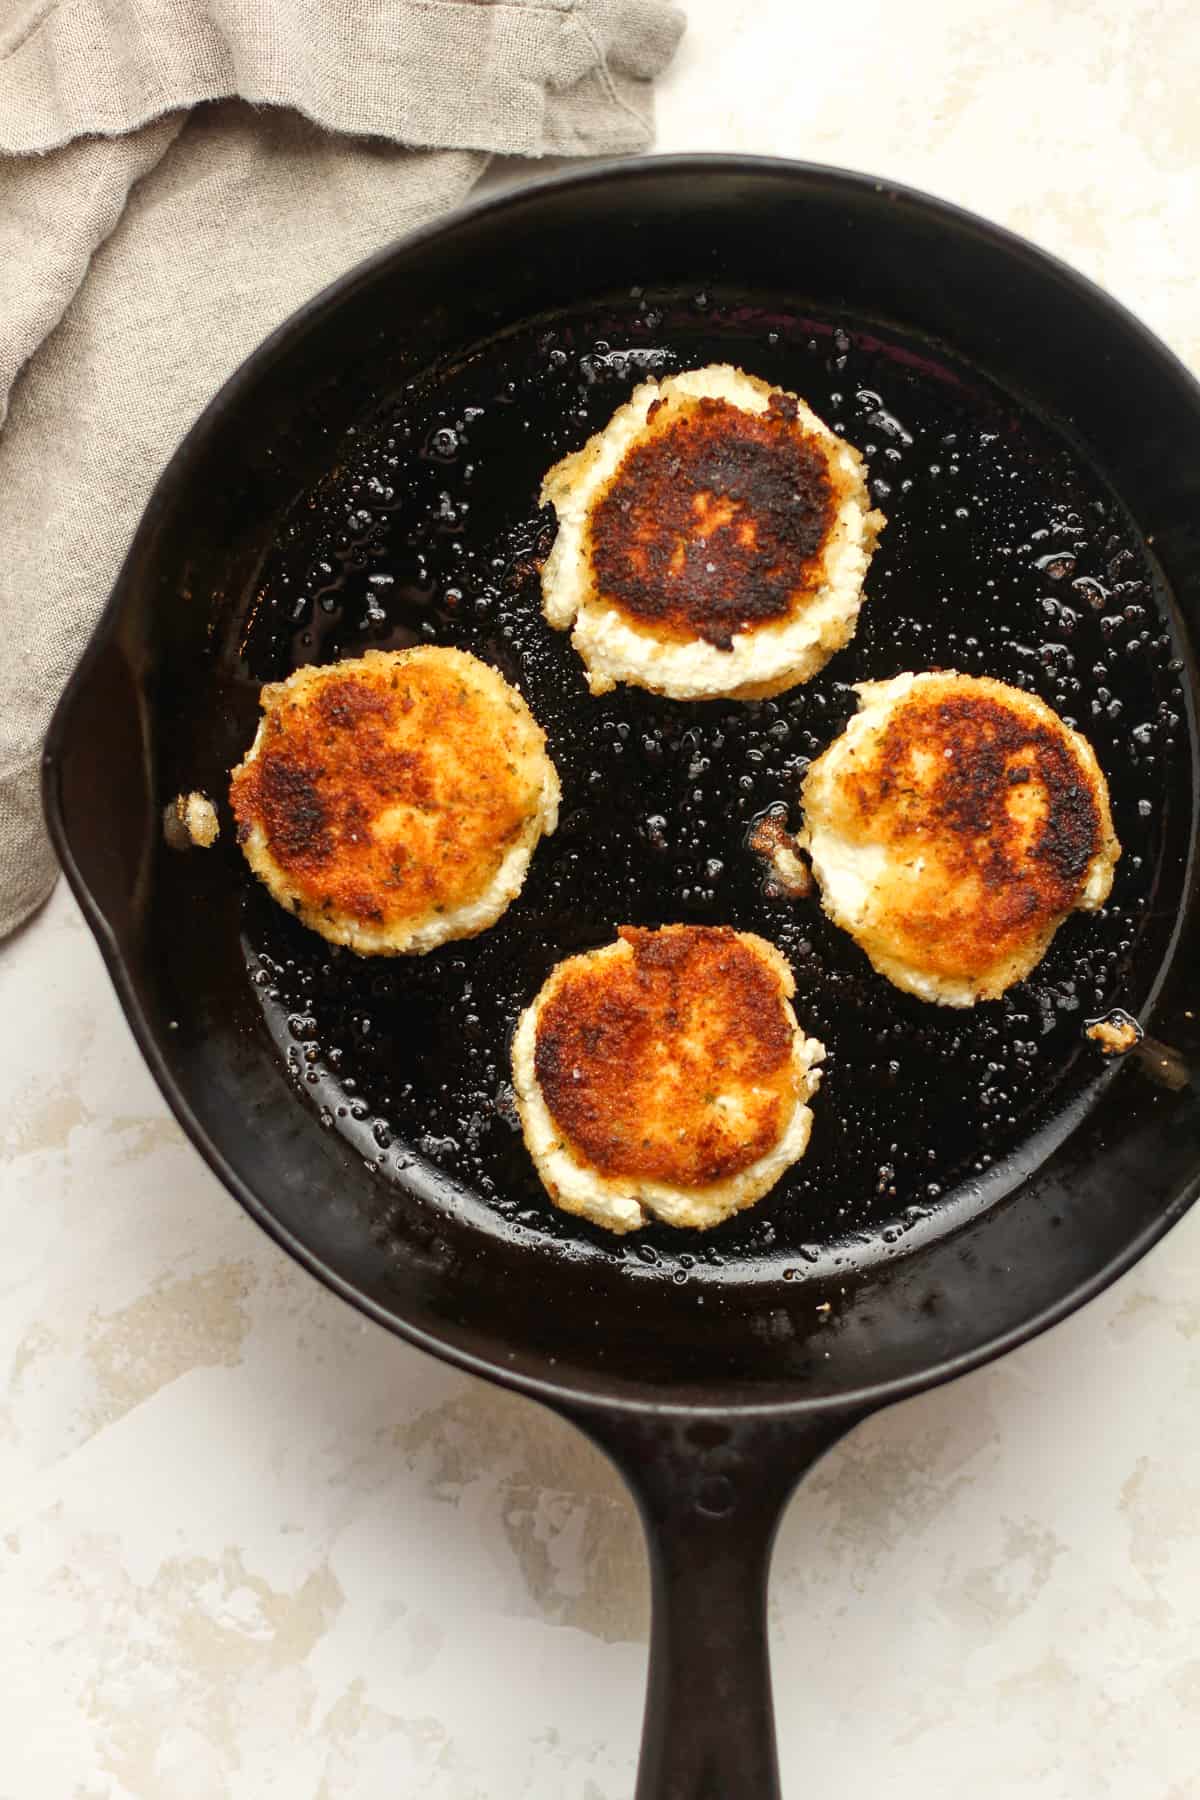 Four rounds of fried goat cheese in a small cast iron skillet.